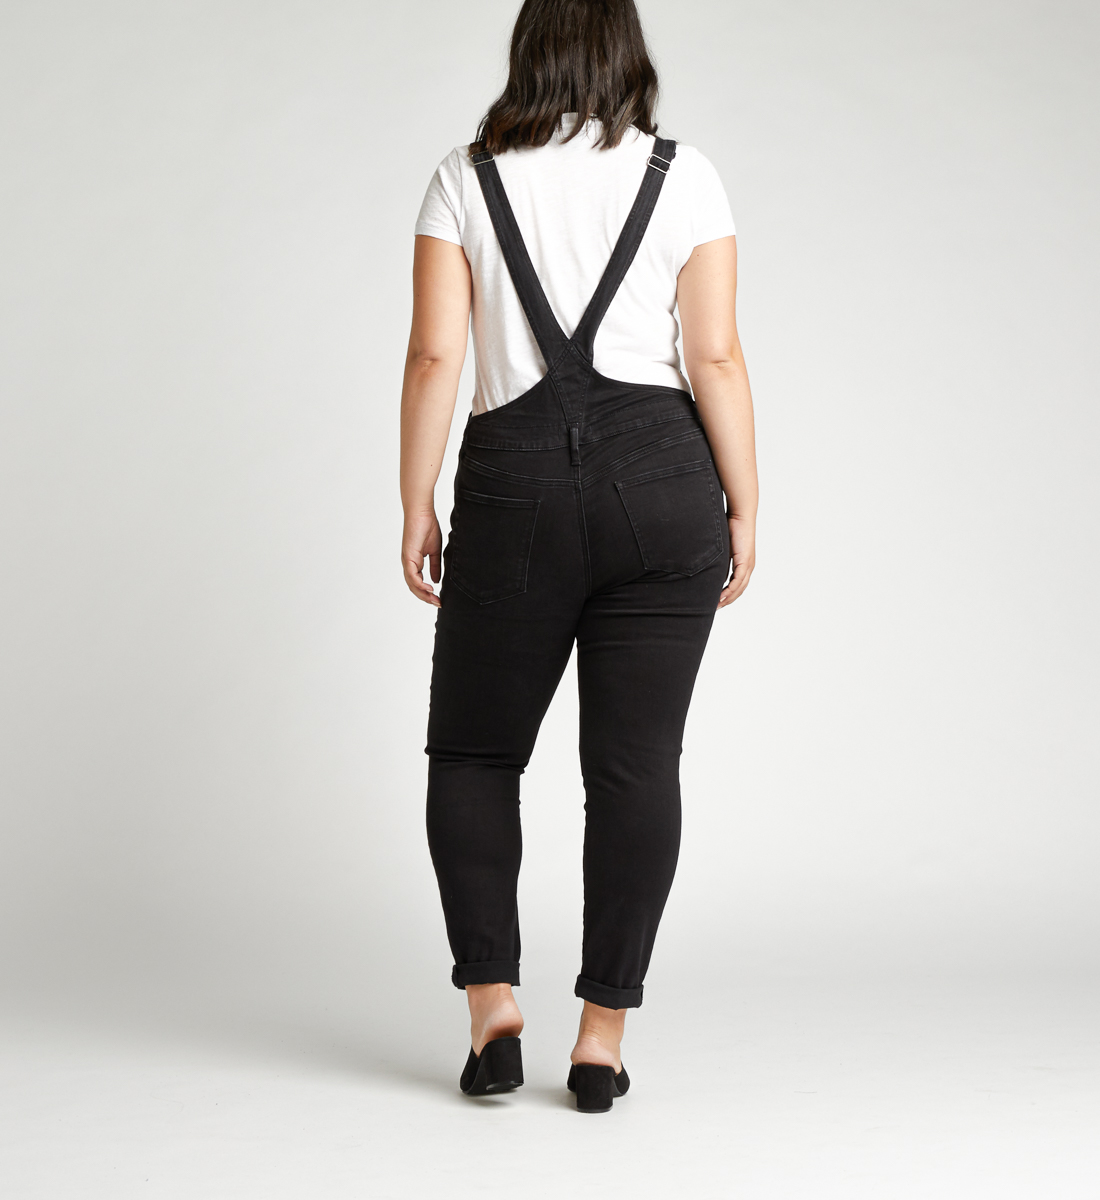 overall jeans plus size